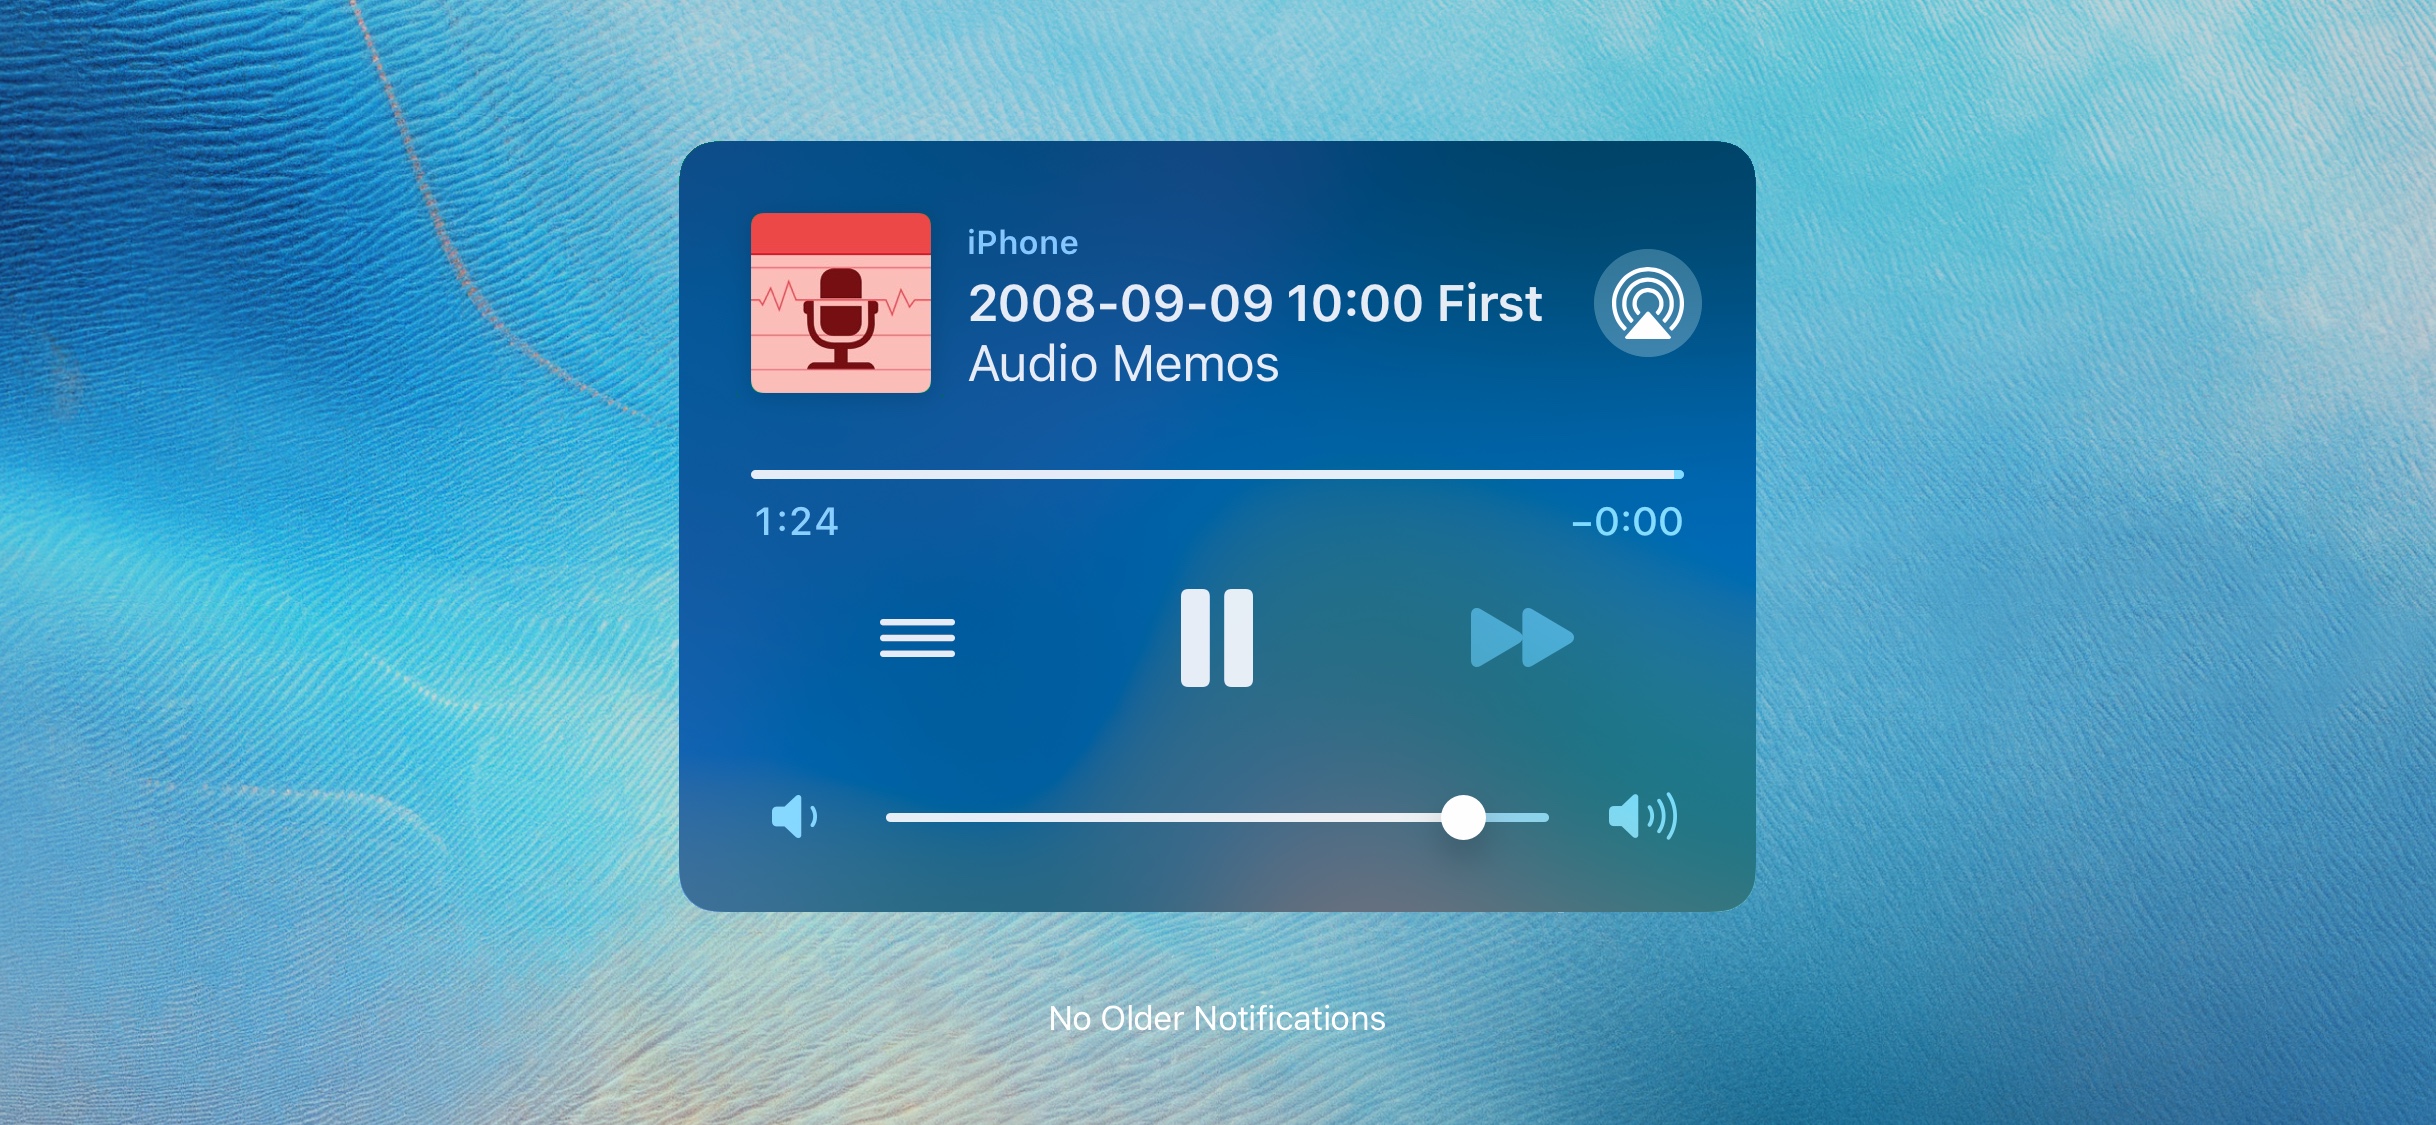 Audio Memos - iPhone, iPad, Apple Watch and Android voice ...